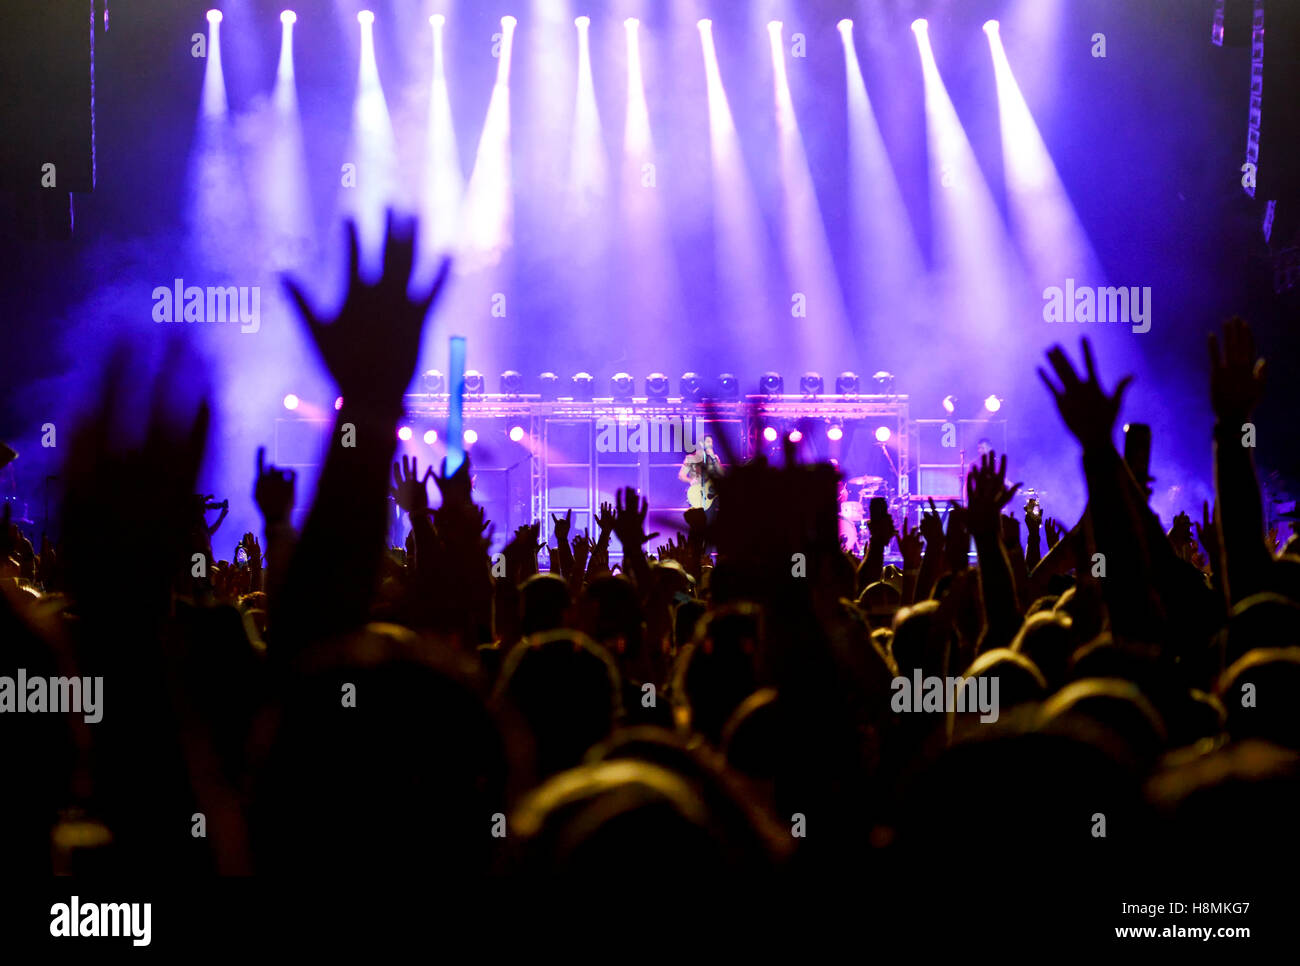 Concert stage with silhouetted hands raised Stock Photo